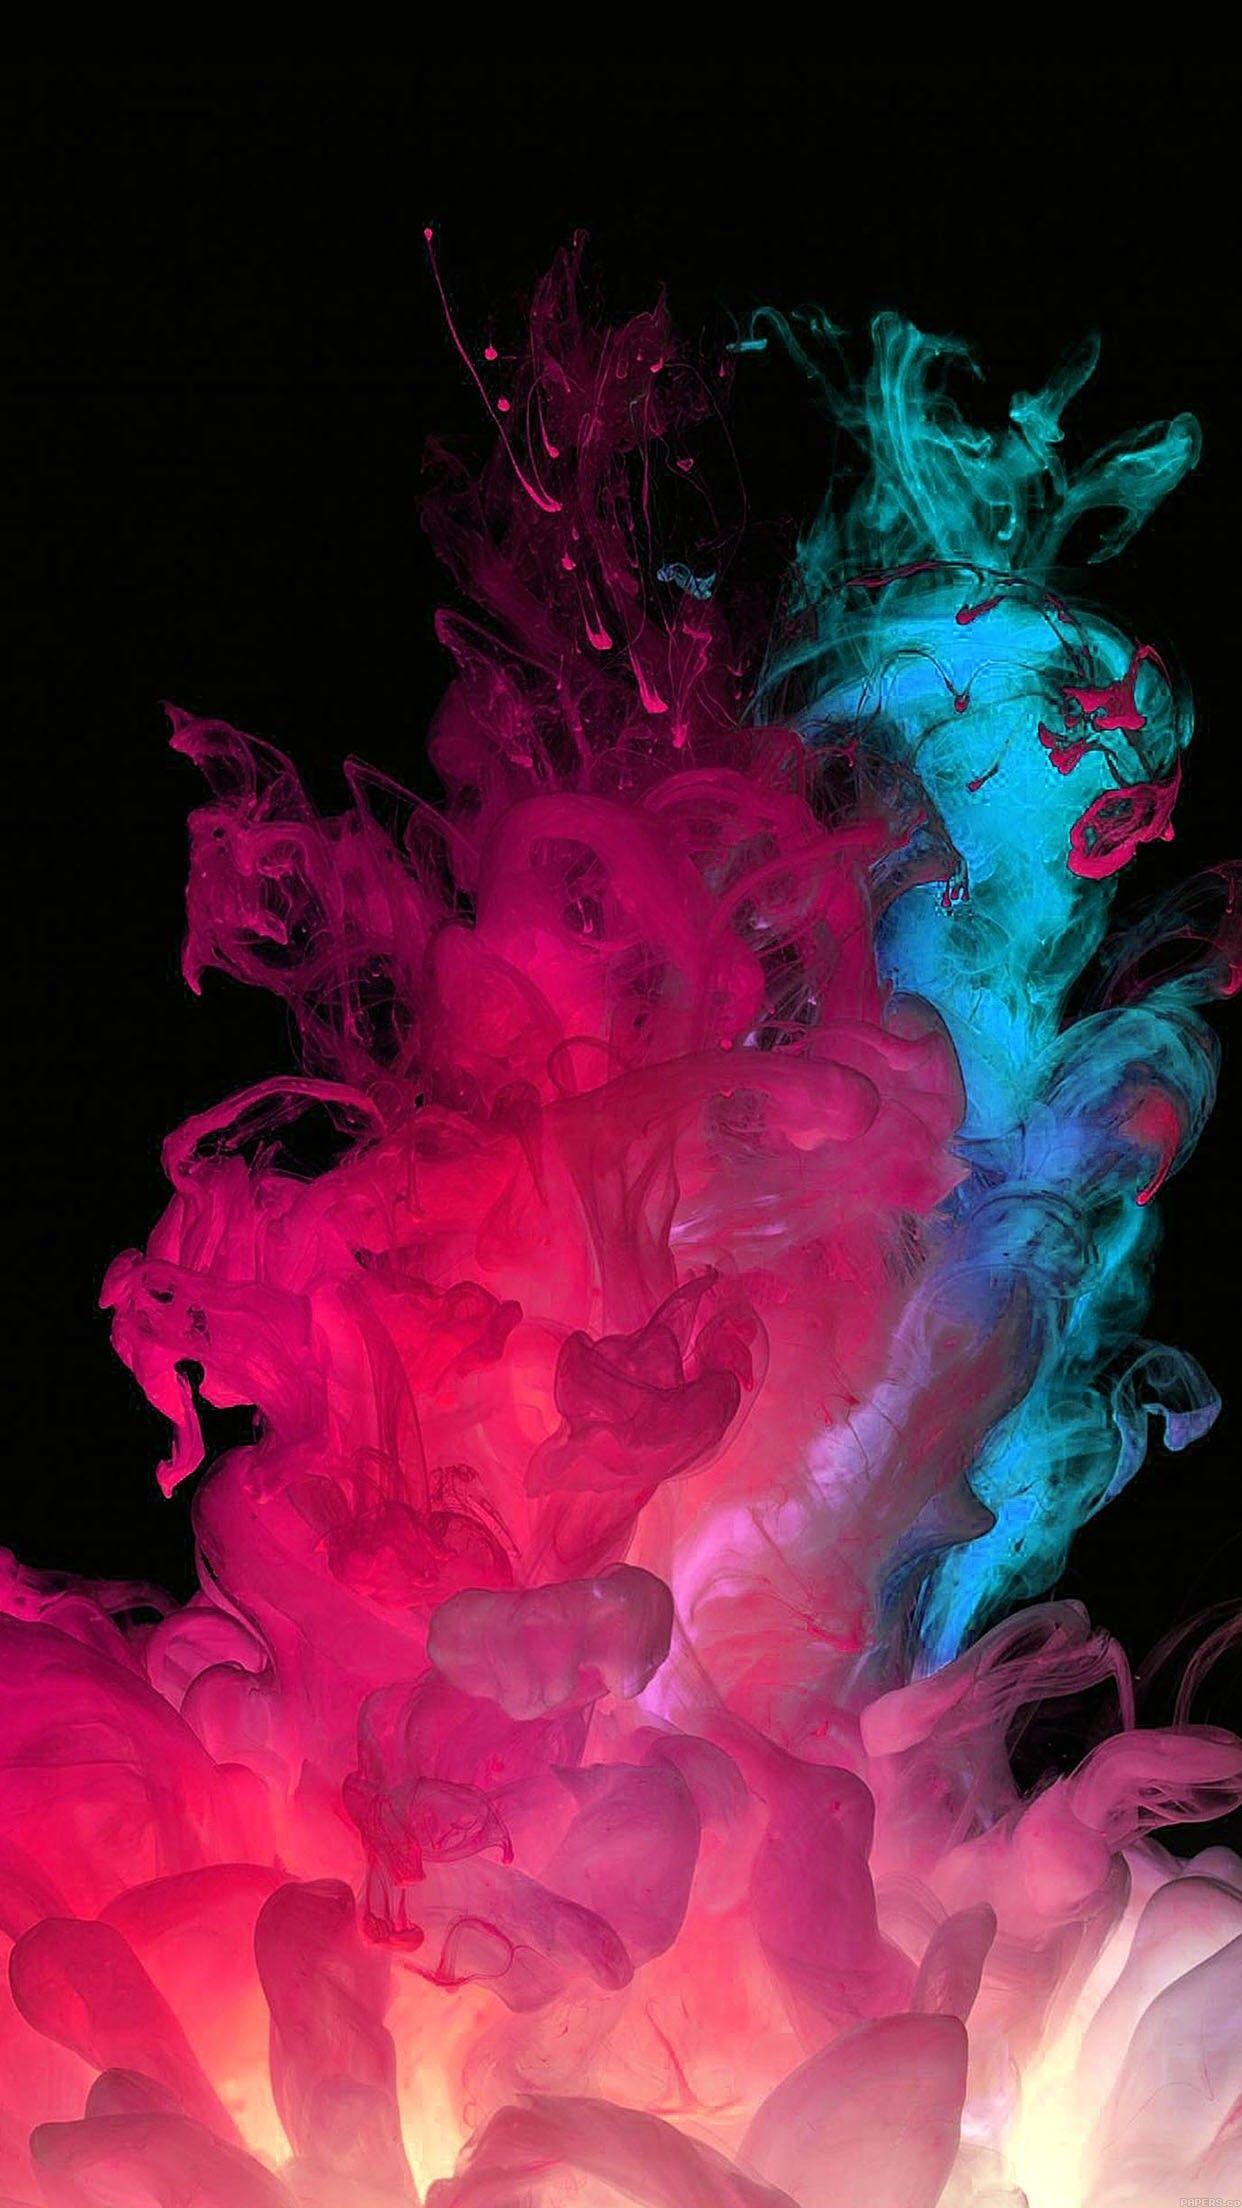 A close up of some colored ink - Smoke